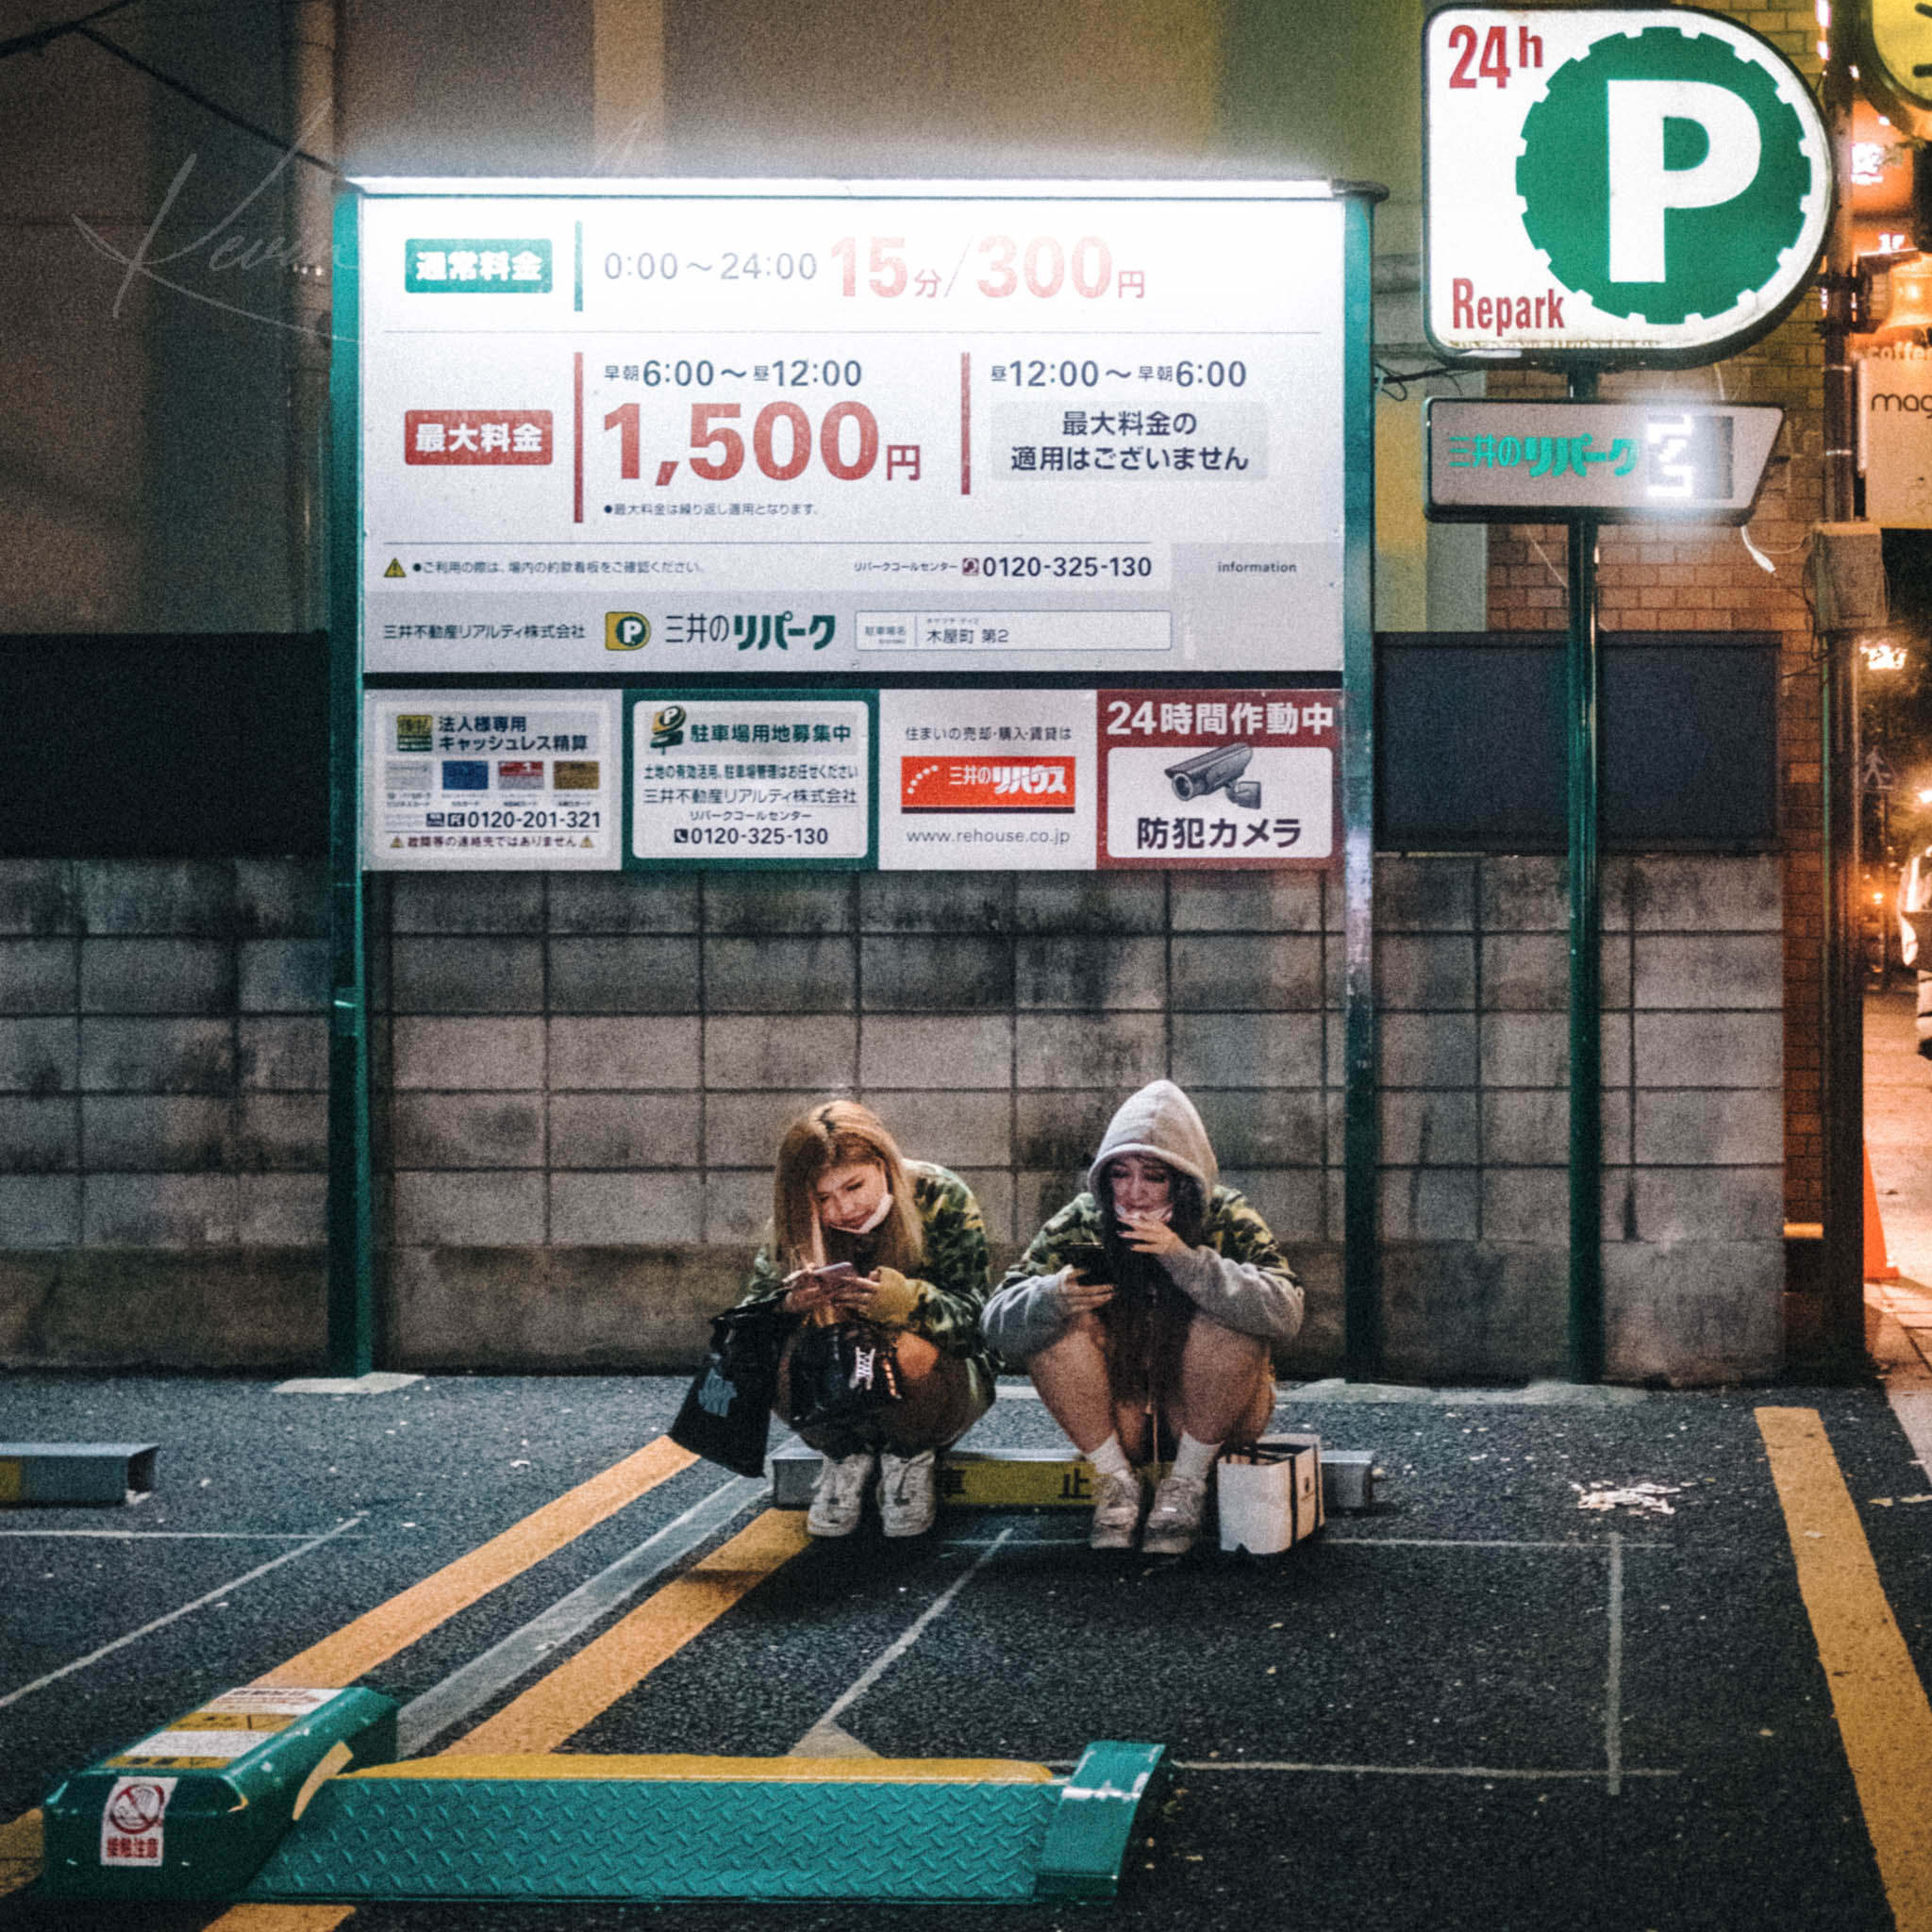 Two girls engrossed in smartphones at a lit-up 24-hour Repark parking lot in Kyoto at night.